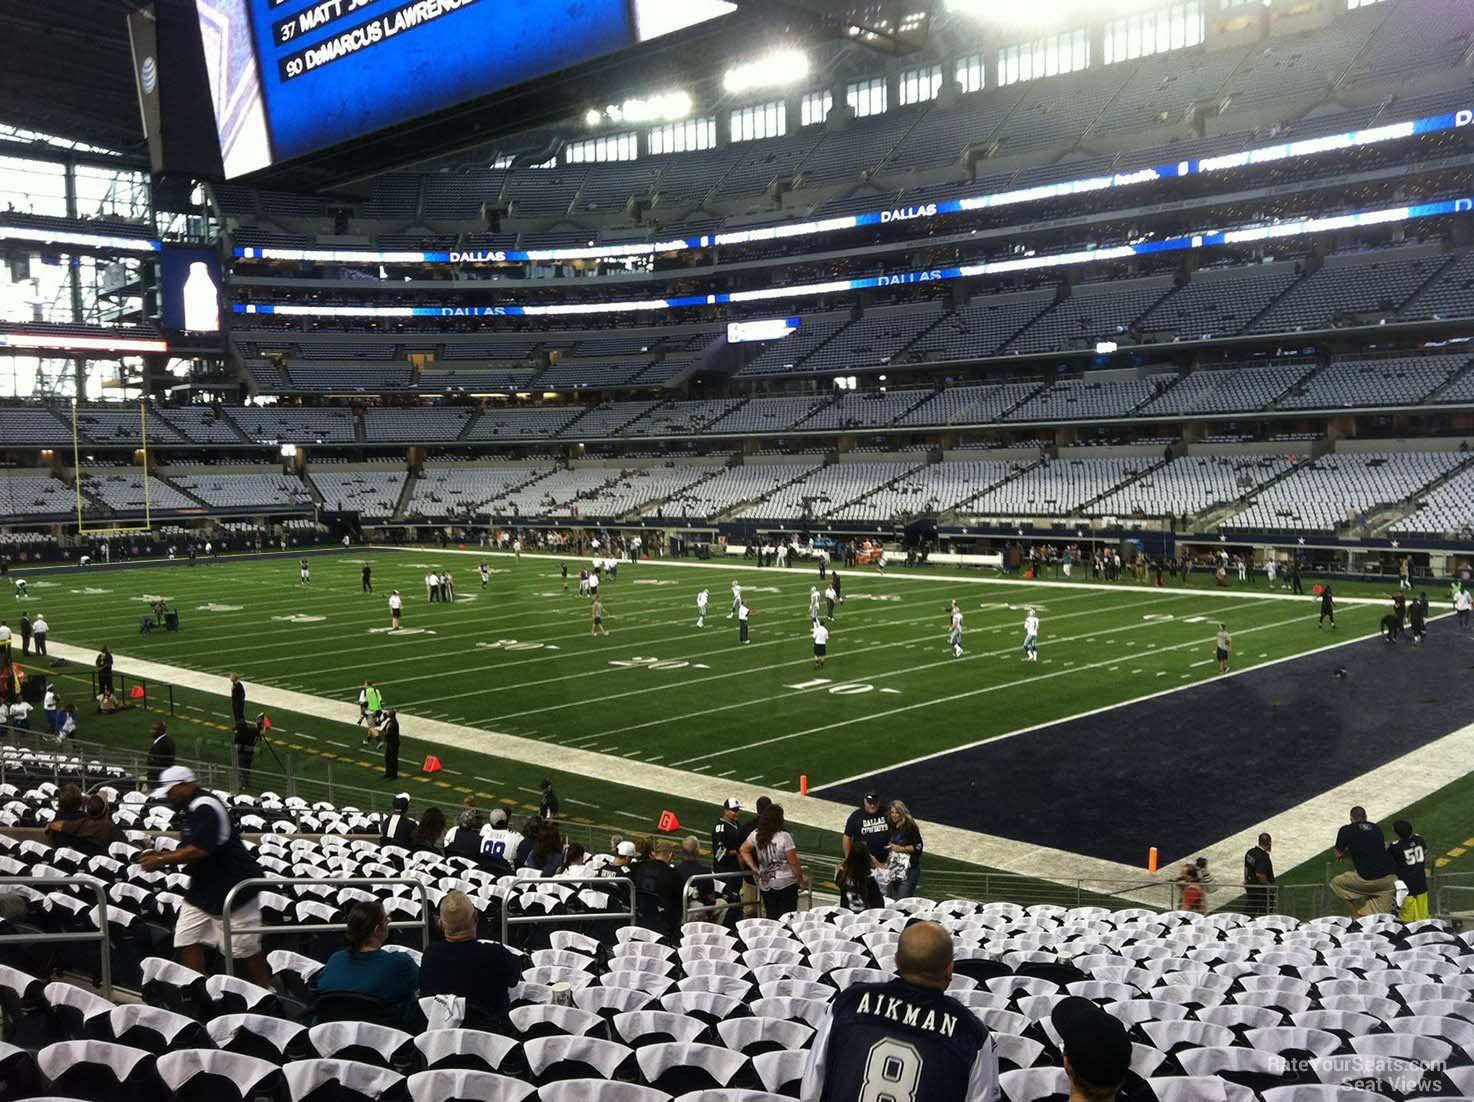 section 102, row 20 seat view  for football - at&t stadium (cowboys stadium)